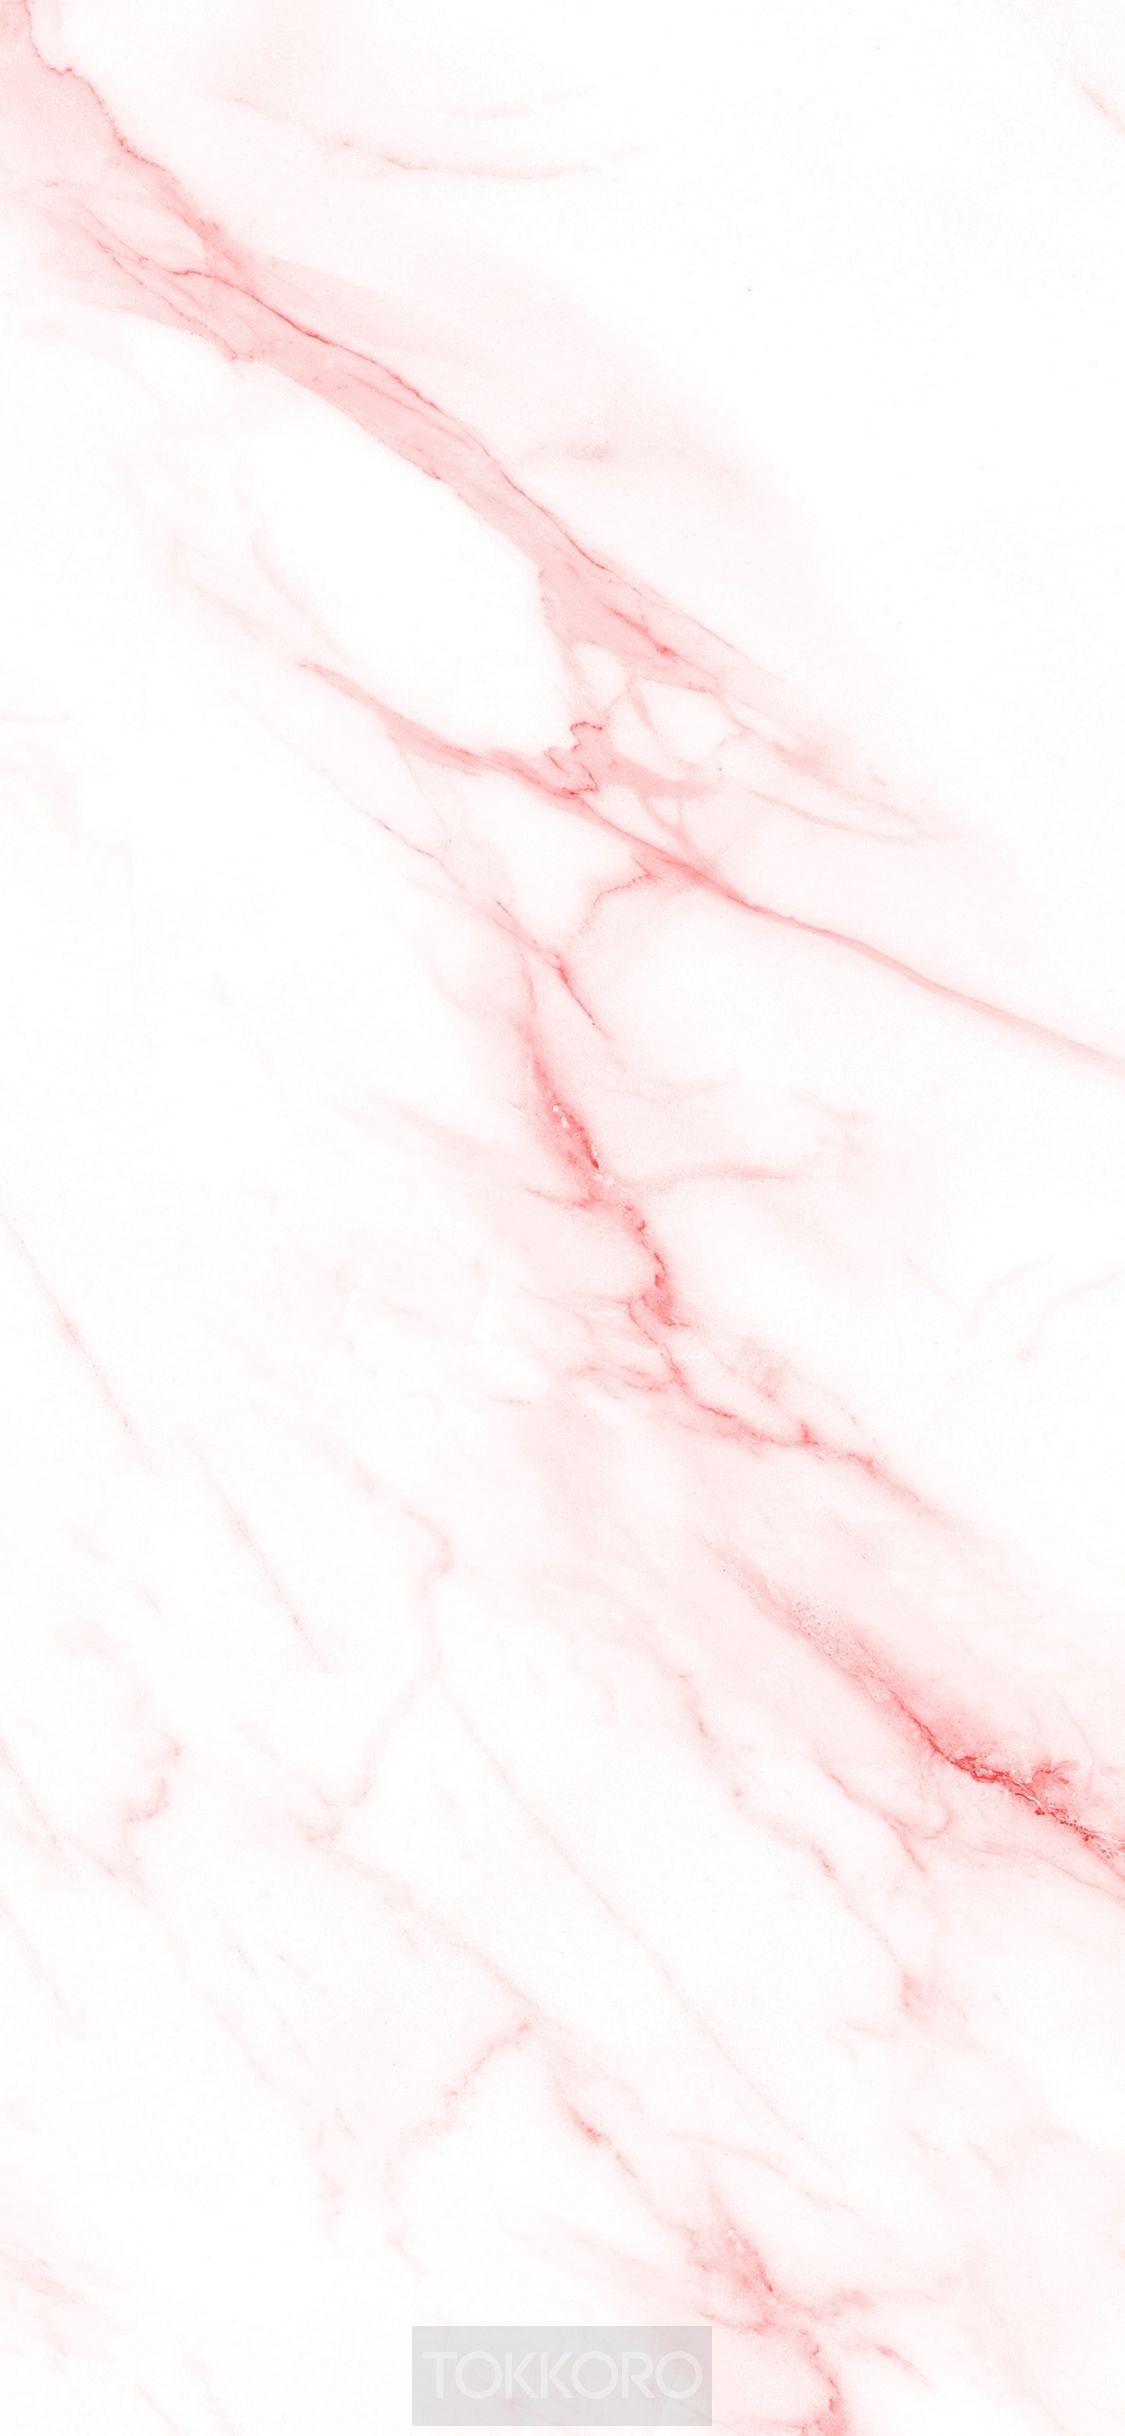 A pink marble texture with white background - Marble